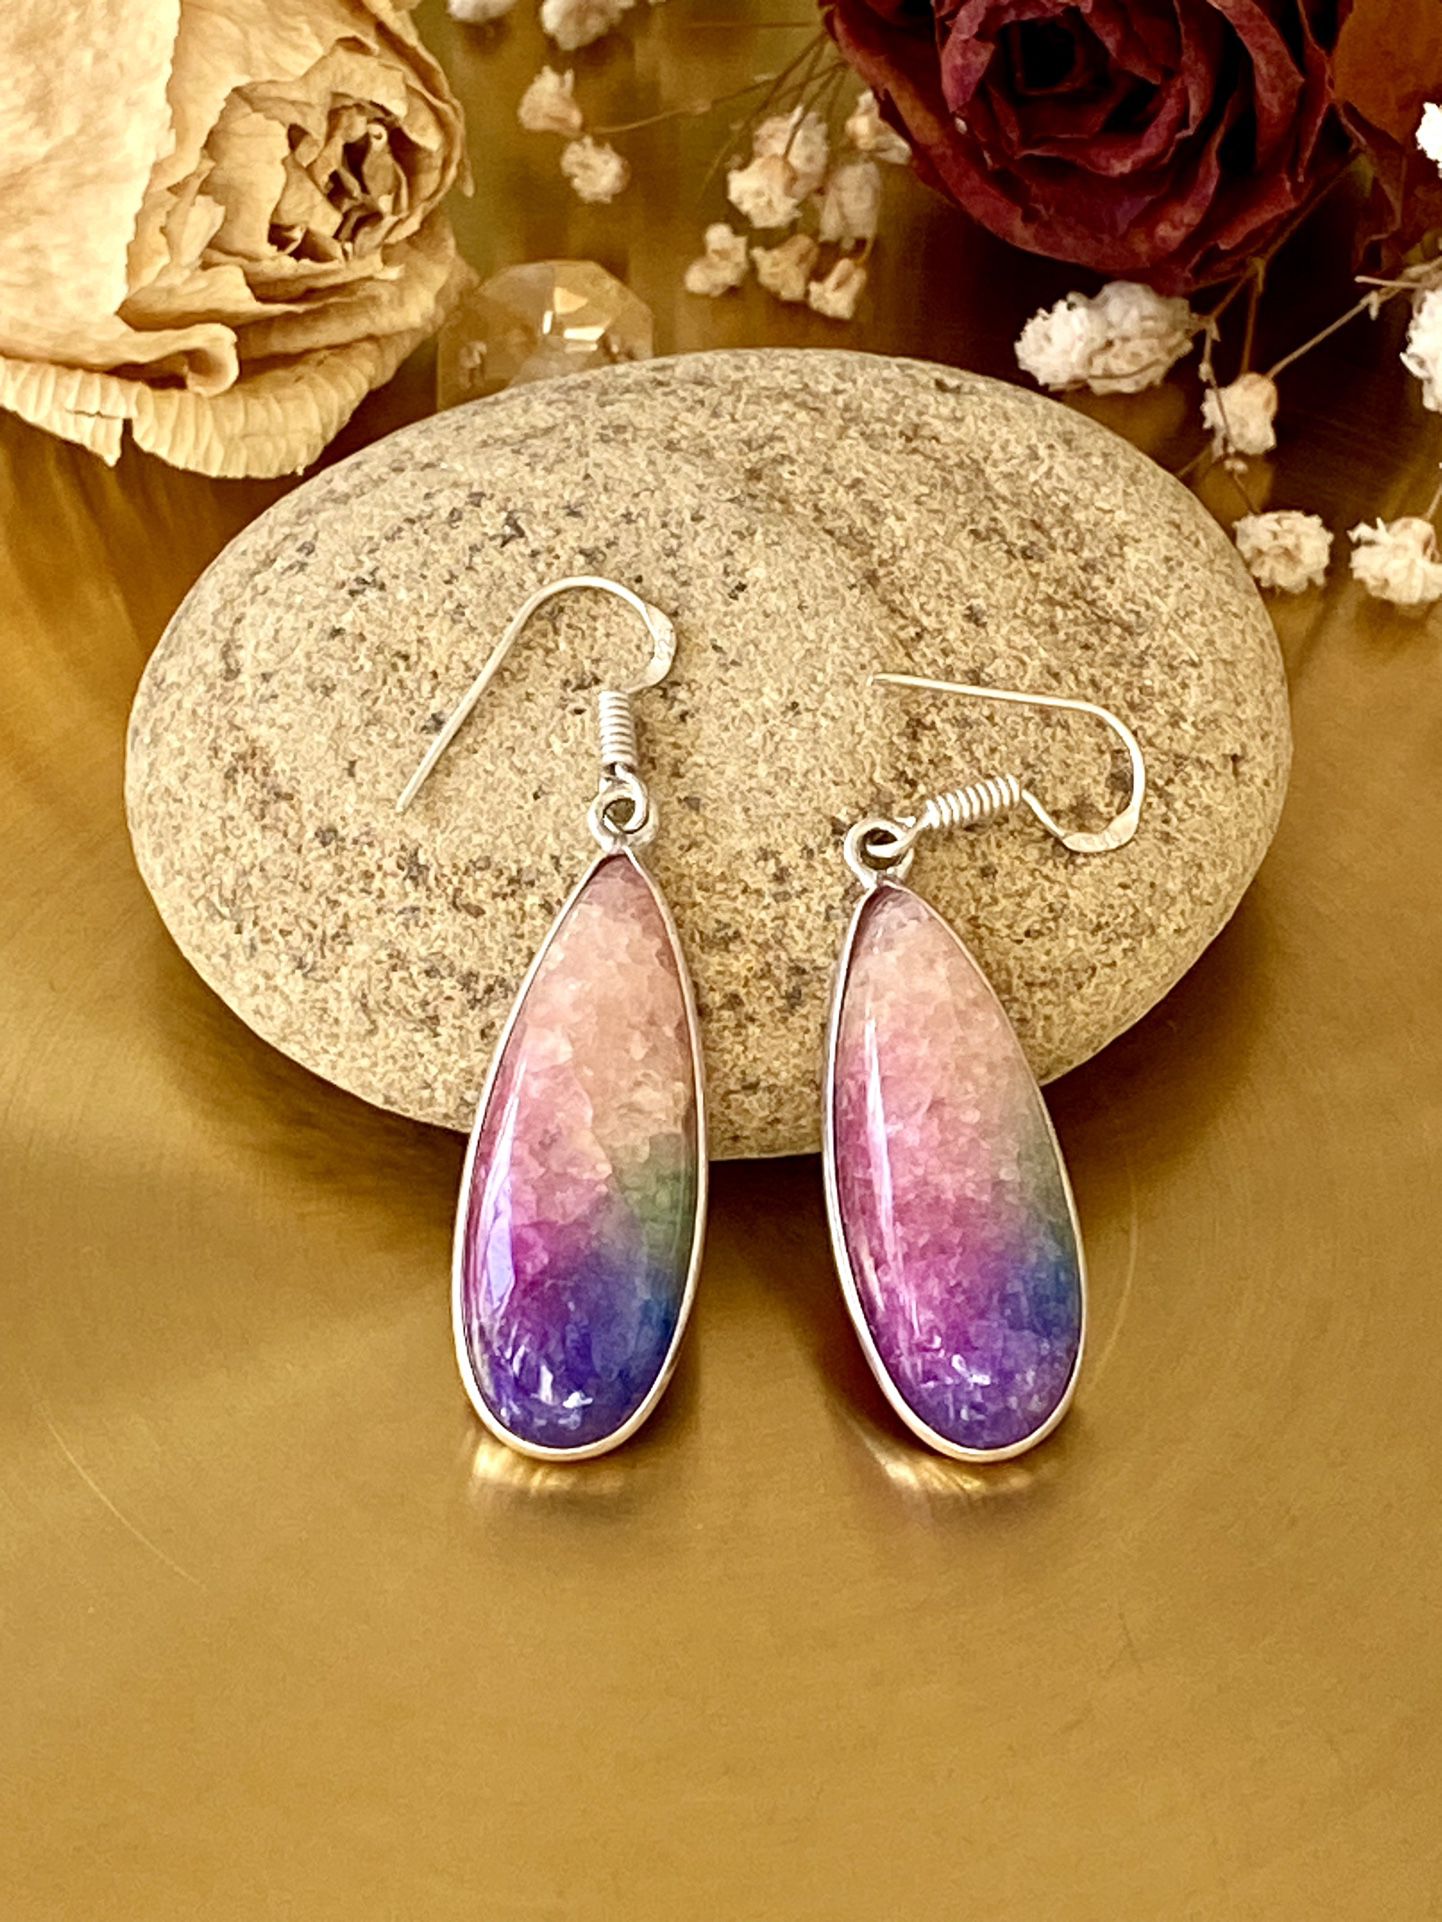 Rainbow Solar Quartz 925 Sterling Silver Overlay Handcrafted Earrings 